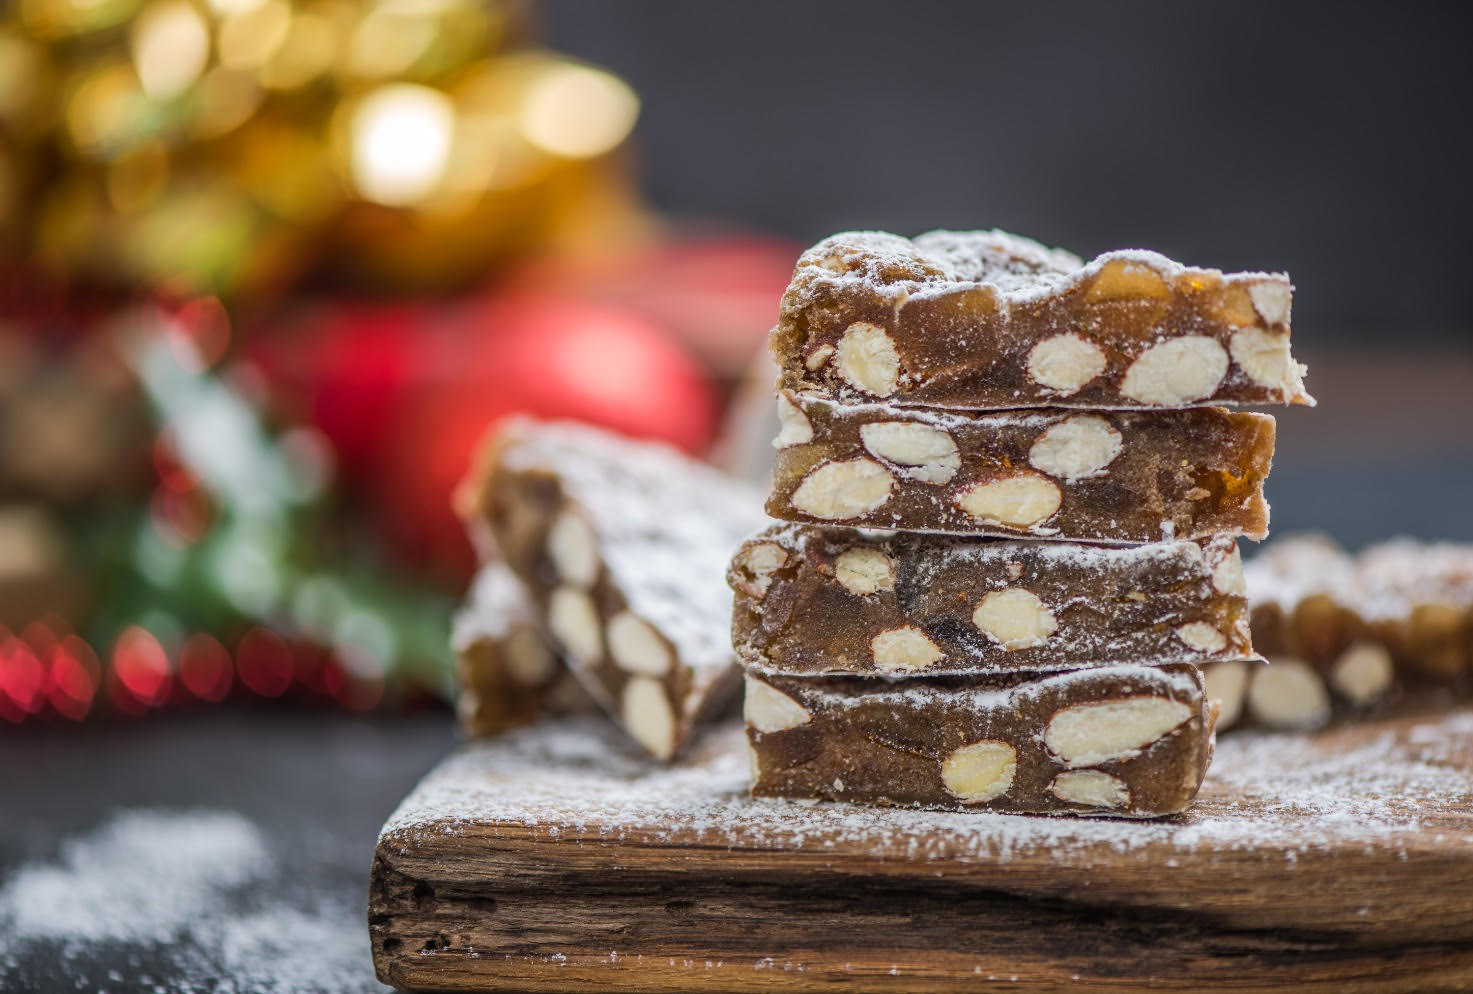 Healthy Christmas Recipes You'll Love